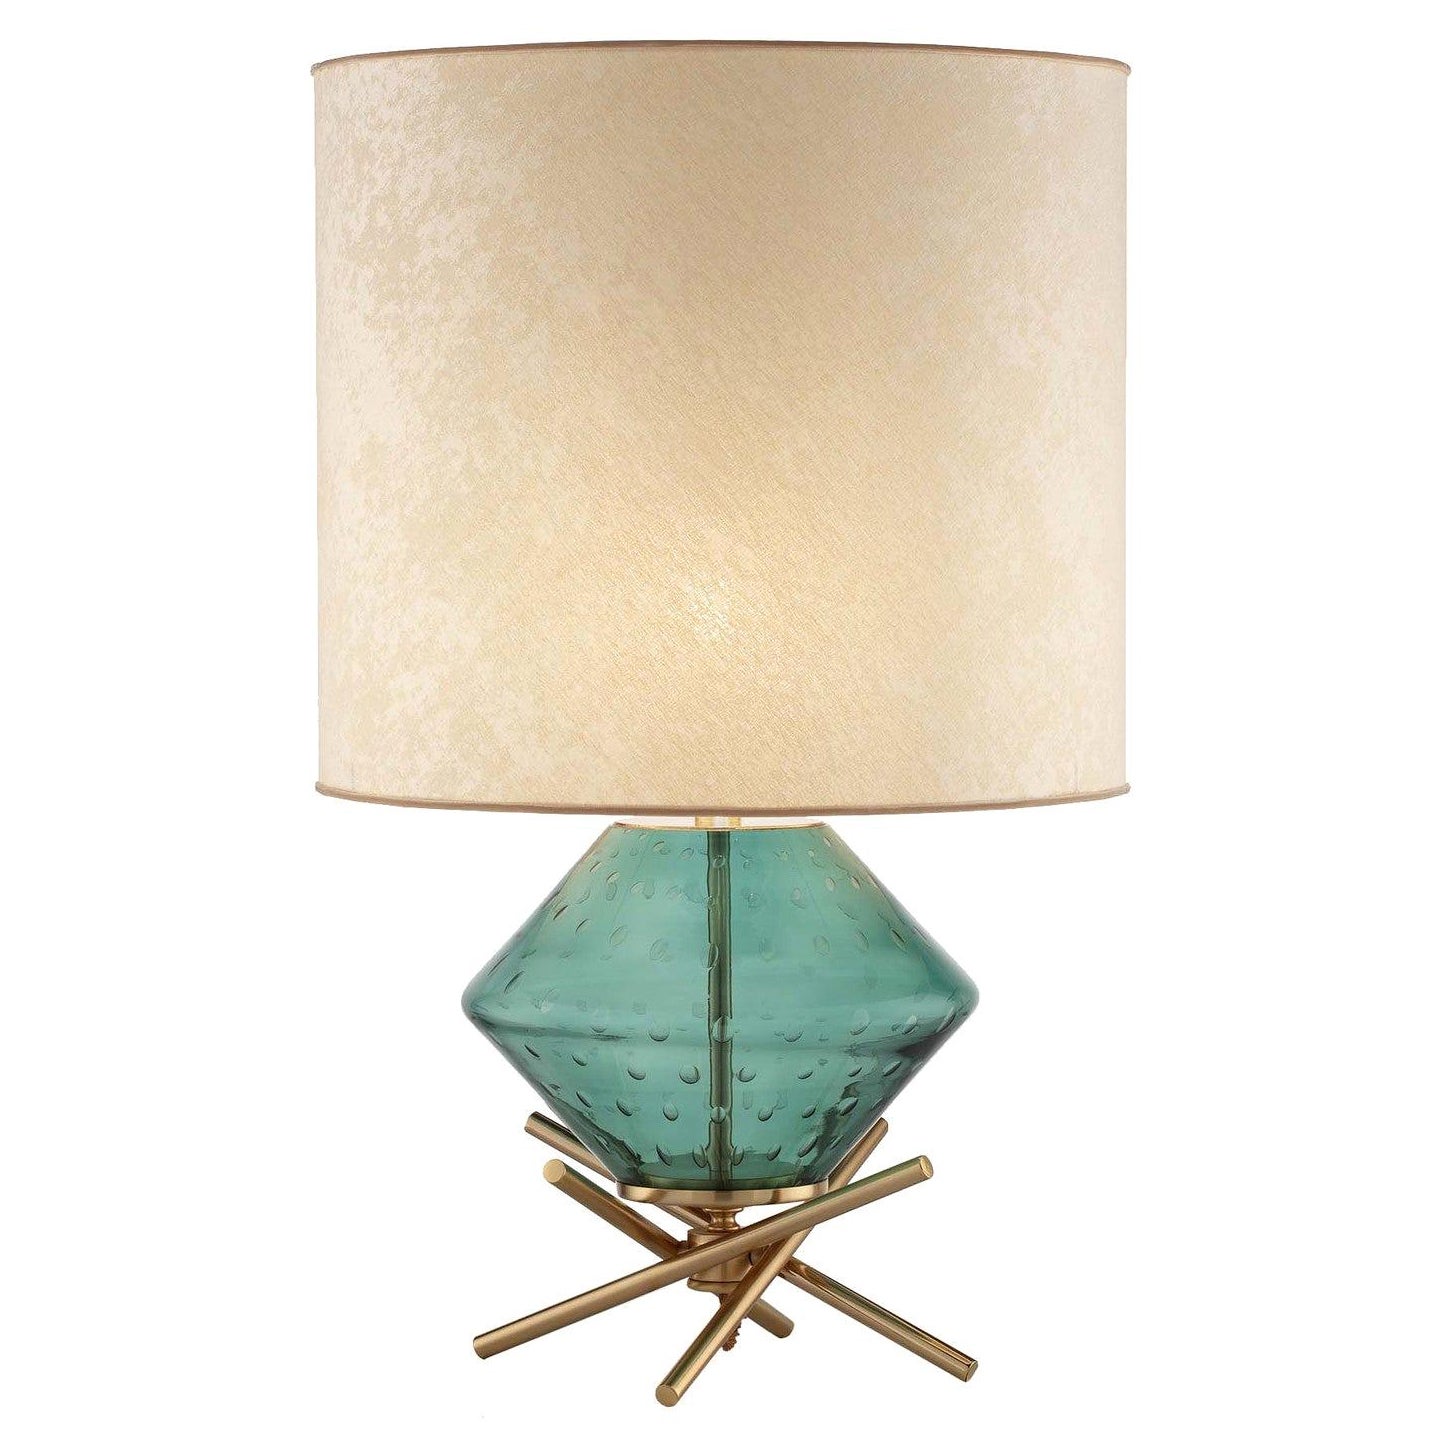 Sophie LG1 Table Lamp For Sale